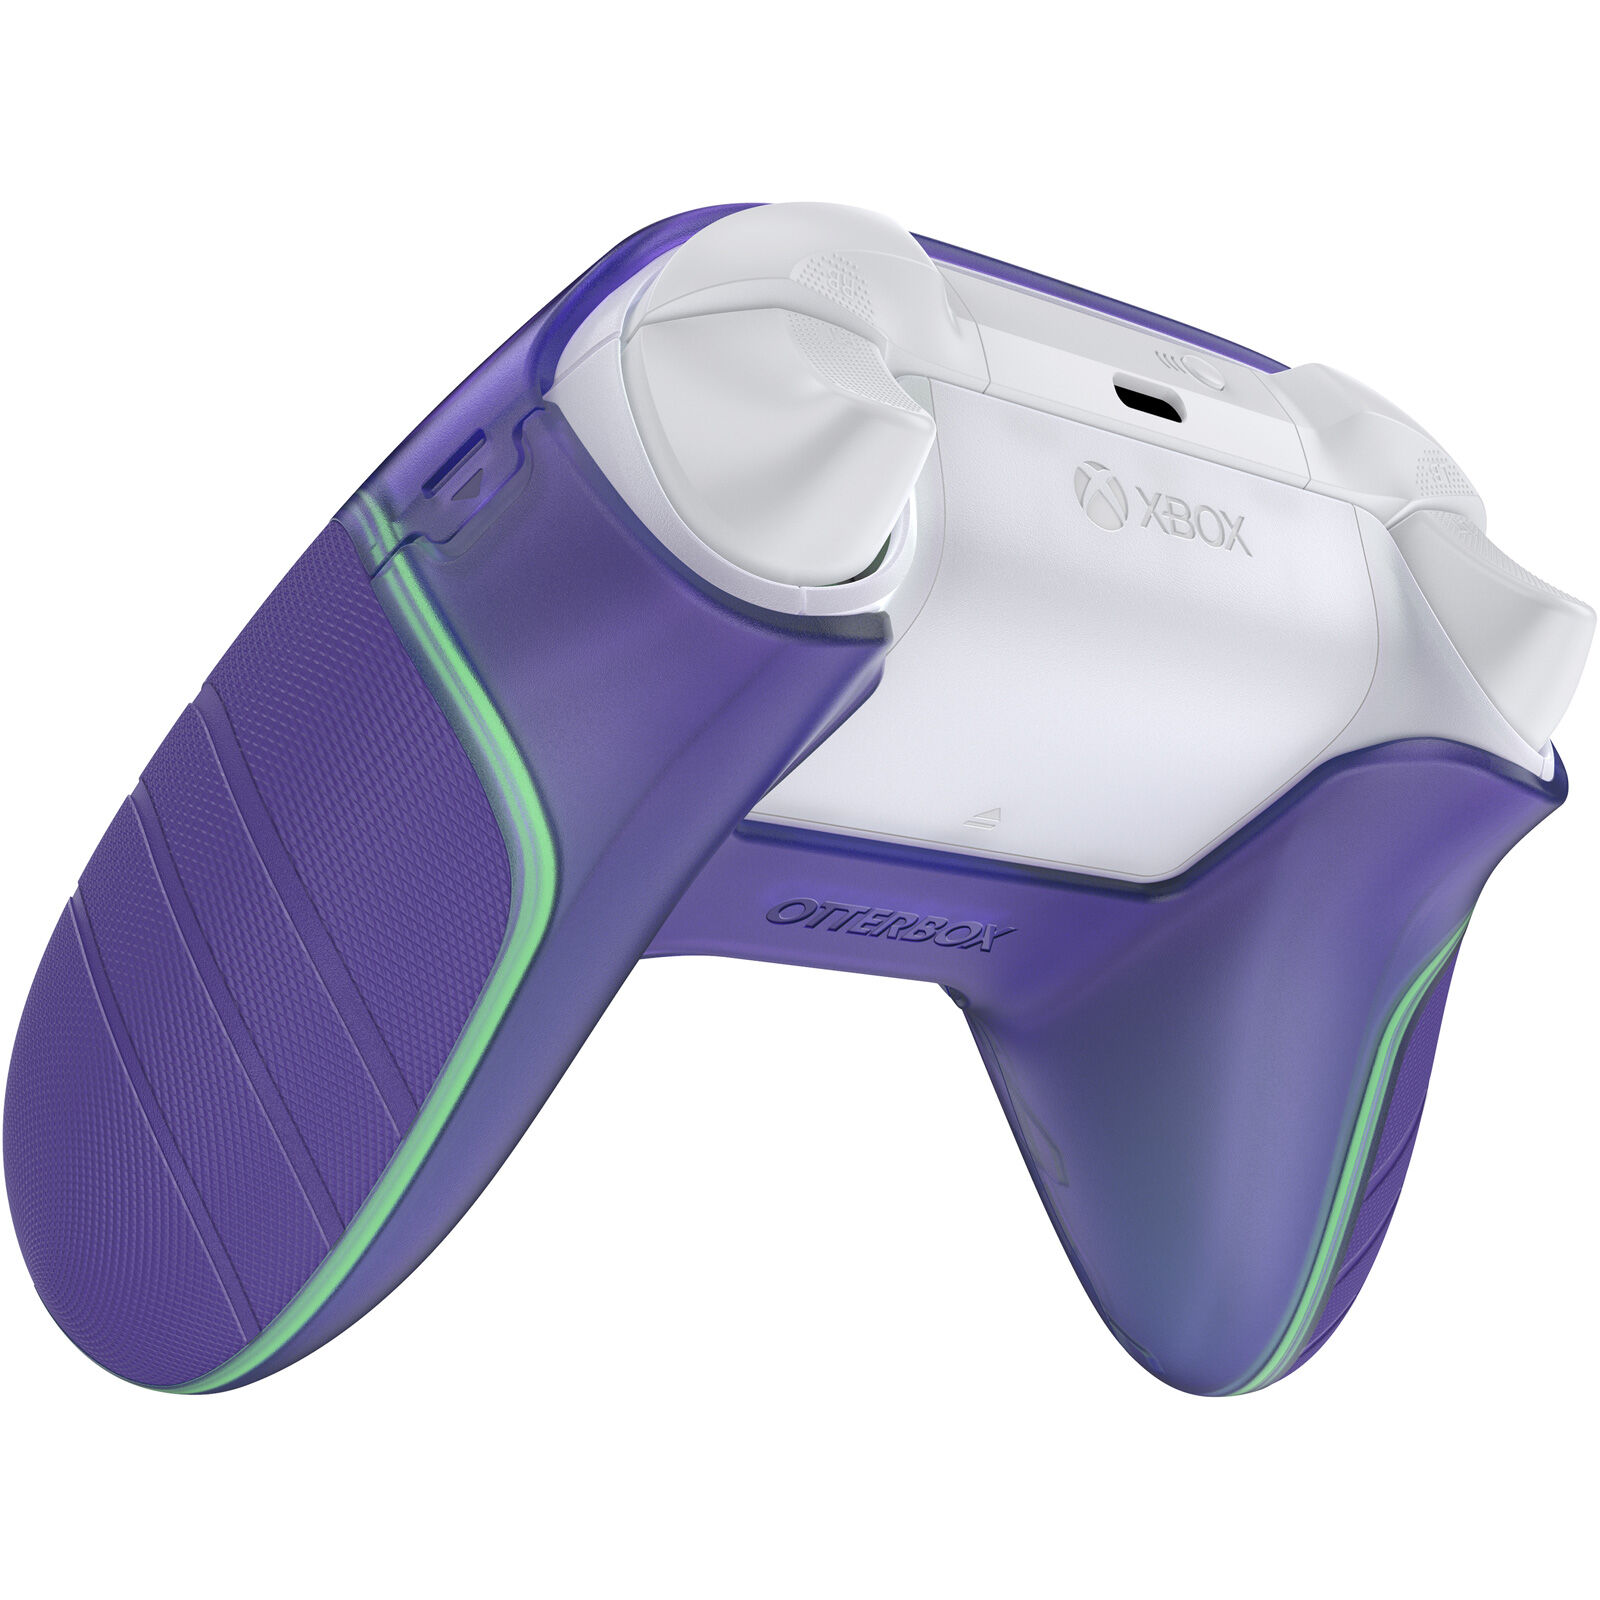 Xbox Controller Shell Designed for Gaming on the Go